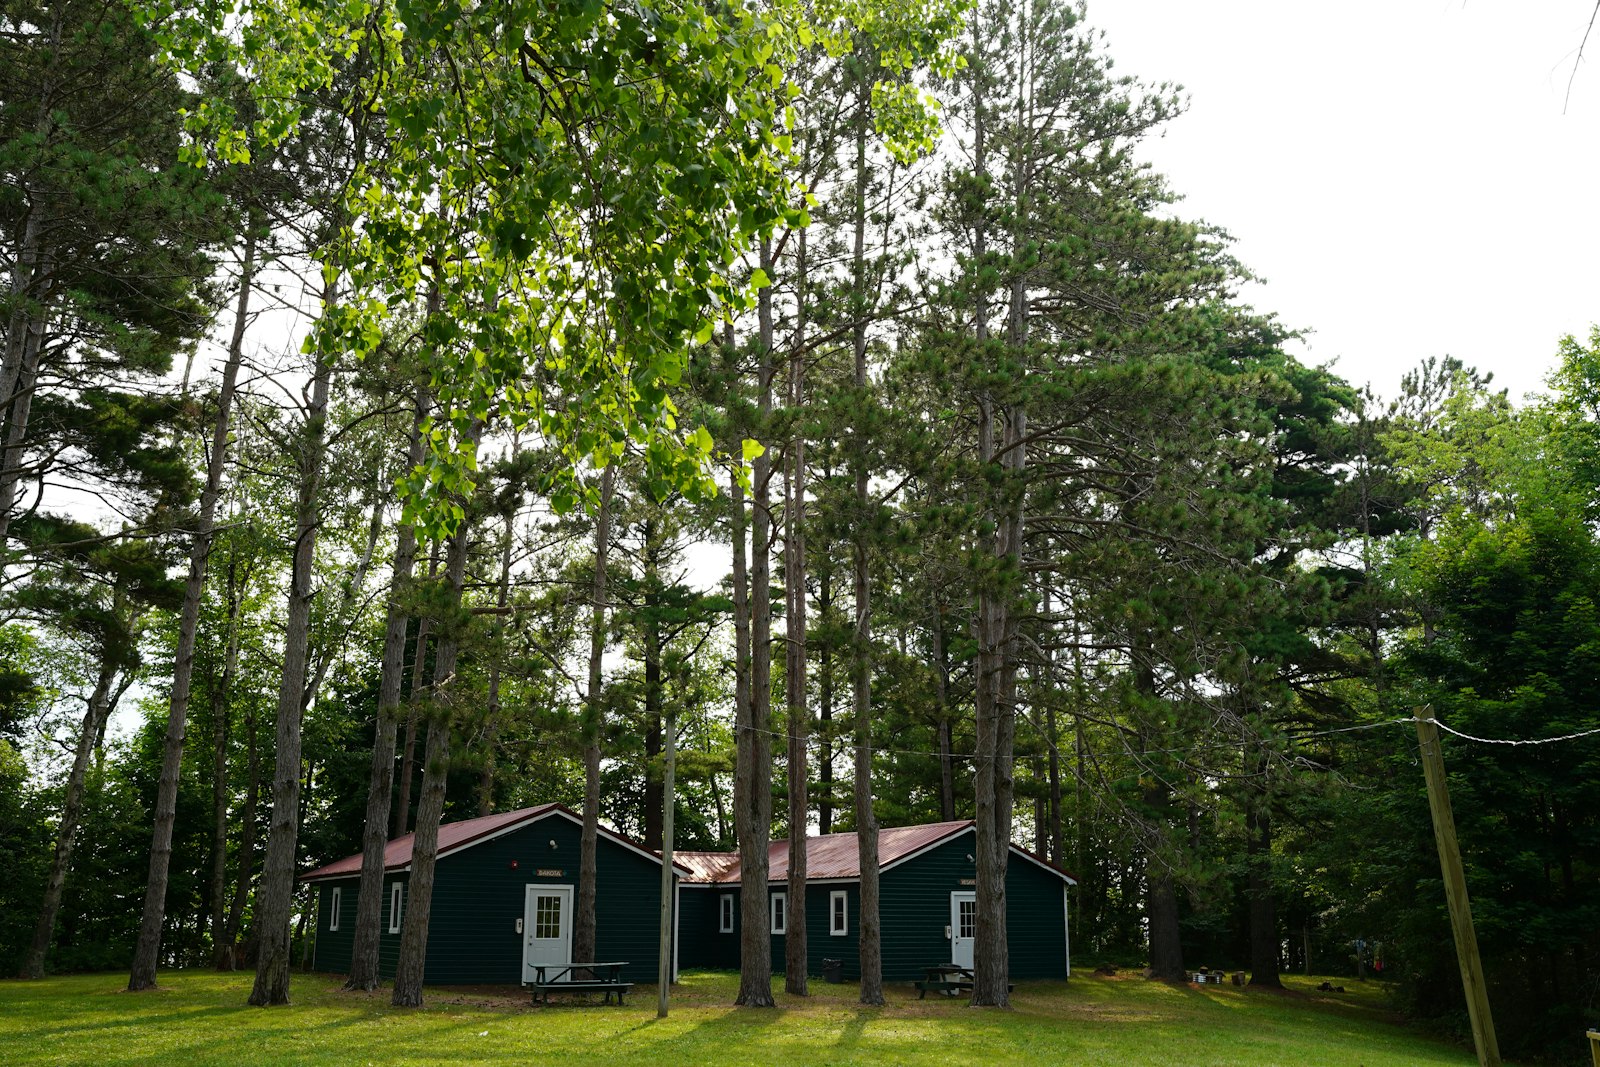 Nestled in the woods of Michigan's Thumb, Camp Ozanam was founded to provide children in difficult situations a chance to explore, make new friends and find peace for a week of camping, games and summer activities.